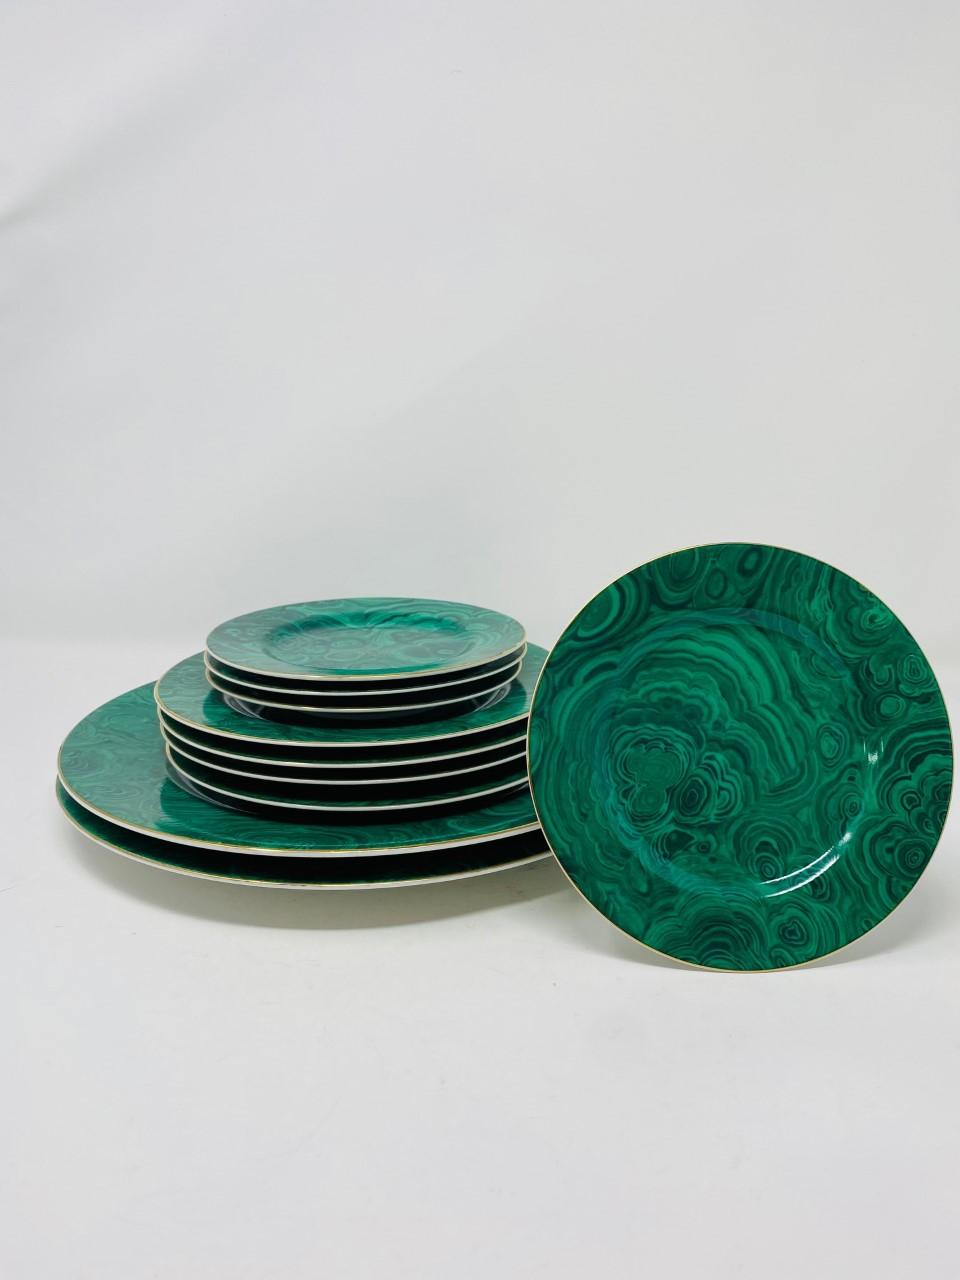 Hand-Crafted Vintage 1970s Neiman Marcus Malachite Porcelain Plates 'Set of 10' For Sale